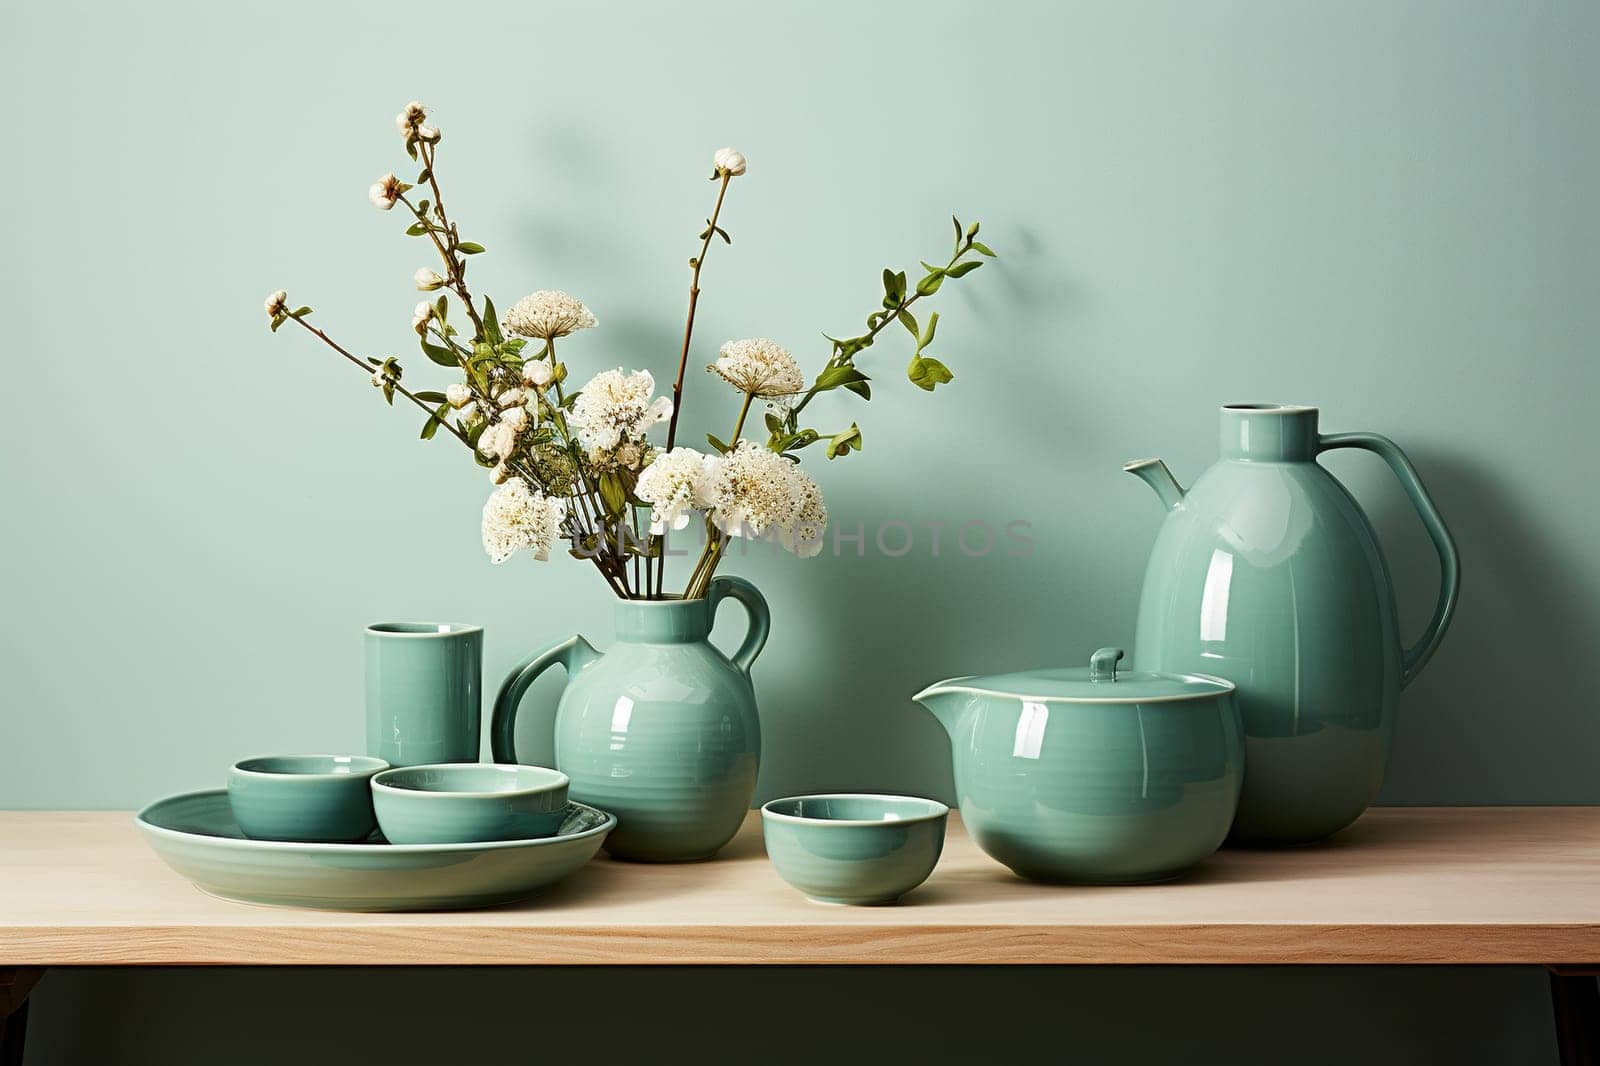 Elegant turquoise ceramic dishes on a wooden tabletop.